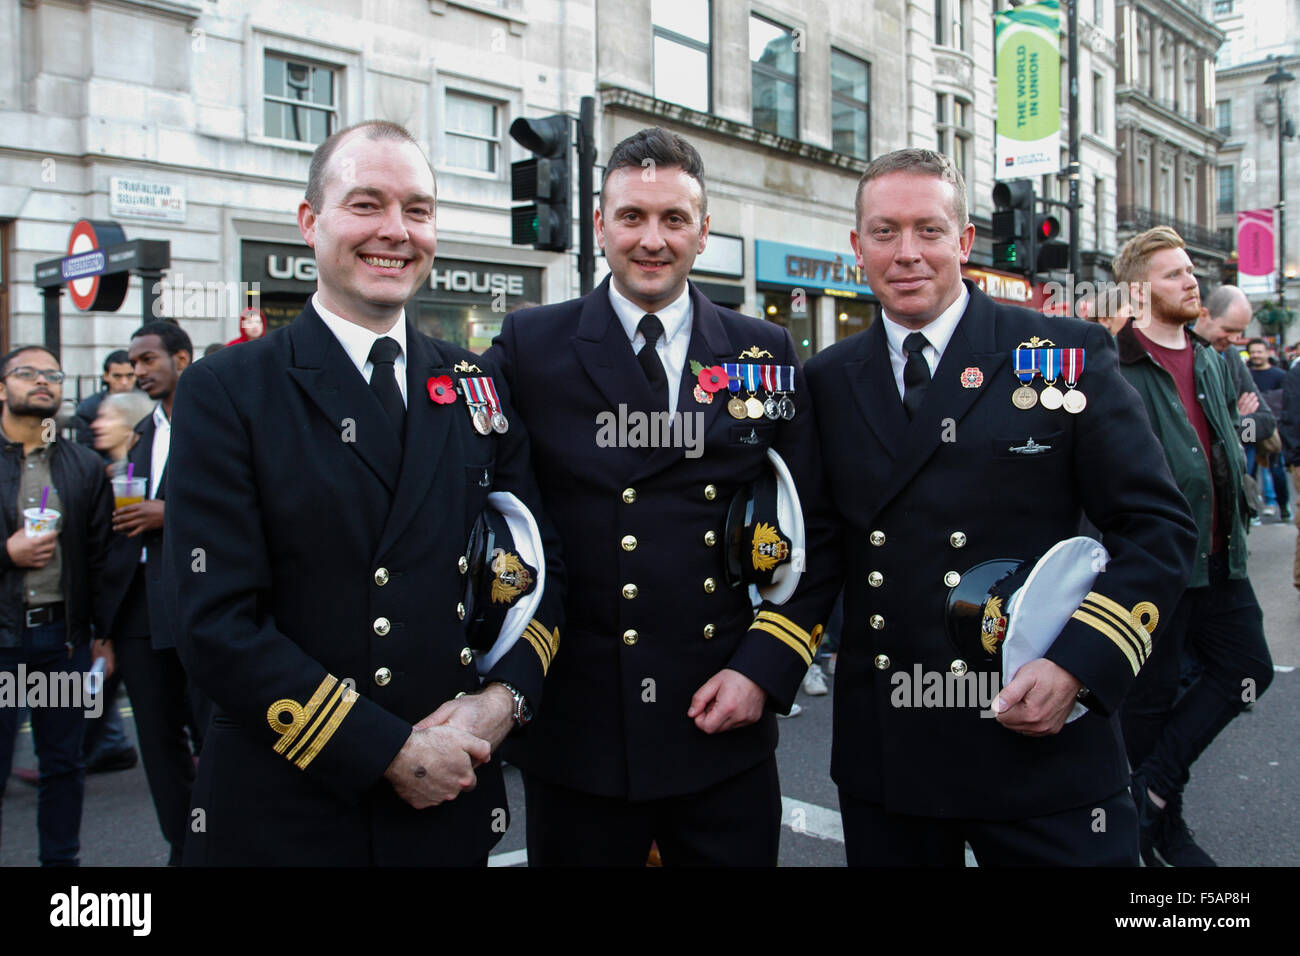 London, UK. 31st October 2015. Flag Officers Sea Training North enjoying the Rugby World Cup final match between New Zealand and Australia match shown on the big screen at the Trafalgar Square Fanzone. Credit: Elsie Kibue / Alamy Live News Stock Photo